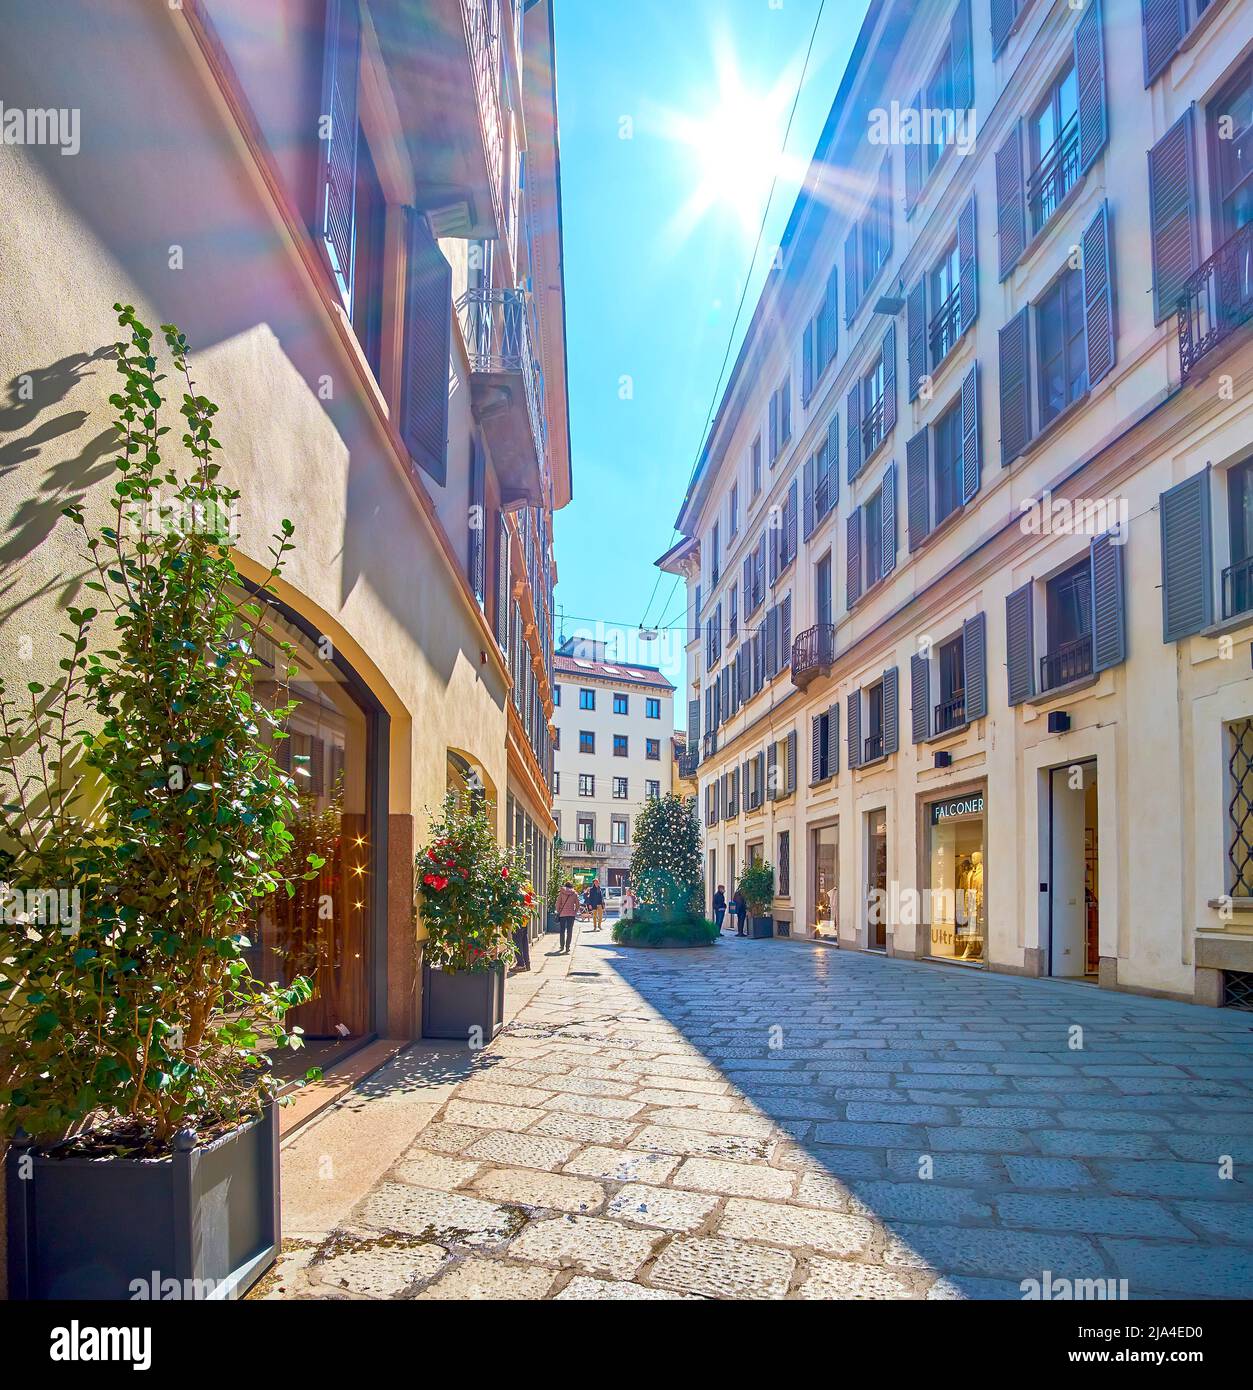 MILAN, ITALY - APRIL 5, 2022: Via della Spiga shopping street with expensive stores and boutiques, on April 5 in Milan, Italy Stock Photo